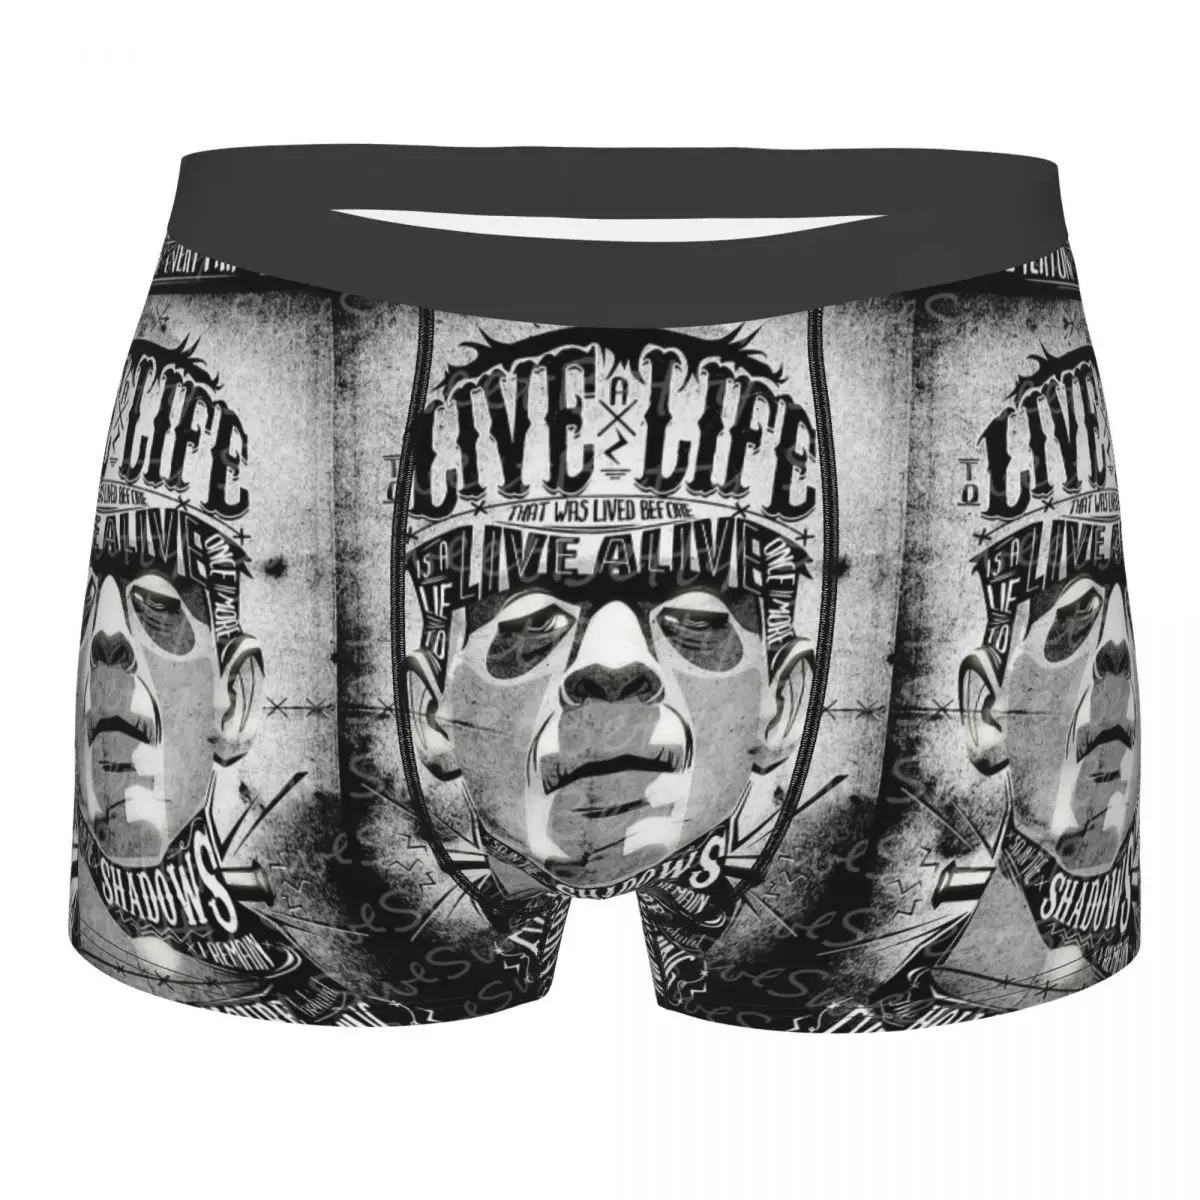 Monster Frankenstein Man's cosy Boxer Briefs,3D printing Underwear, Highly Breathable Top Quality Birthday Gifts funny men s medical nurse anesthesia labels men s briefs highly breathable underwear top quality print shorts birthday gifts